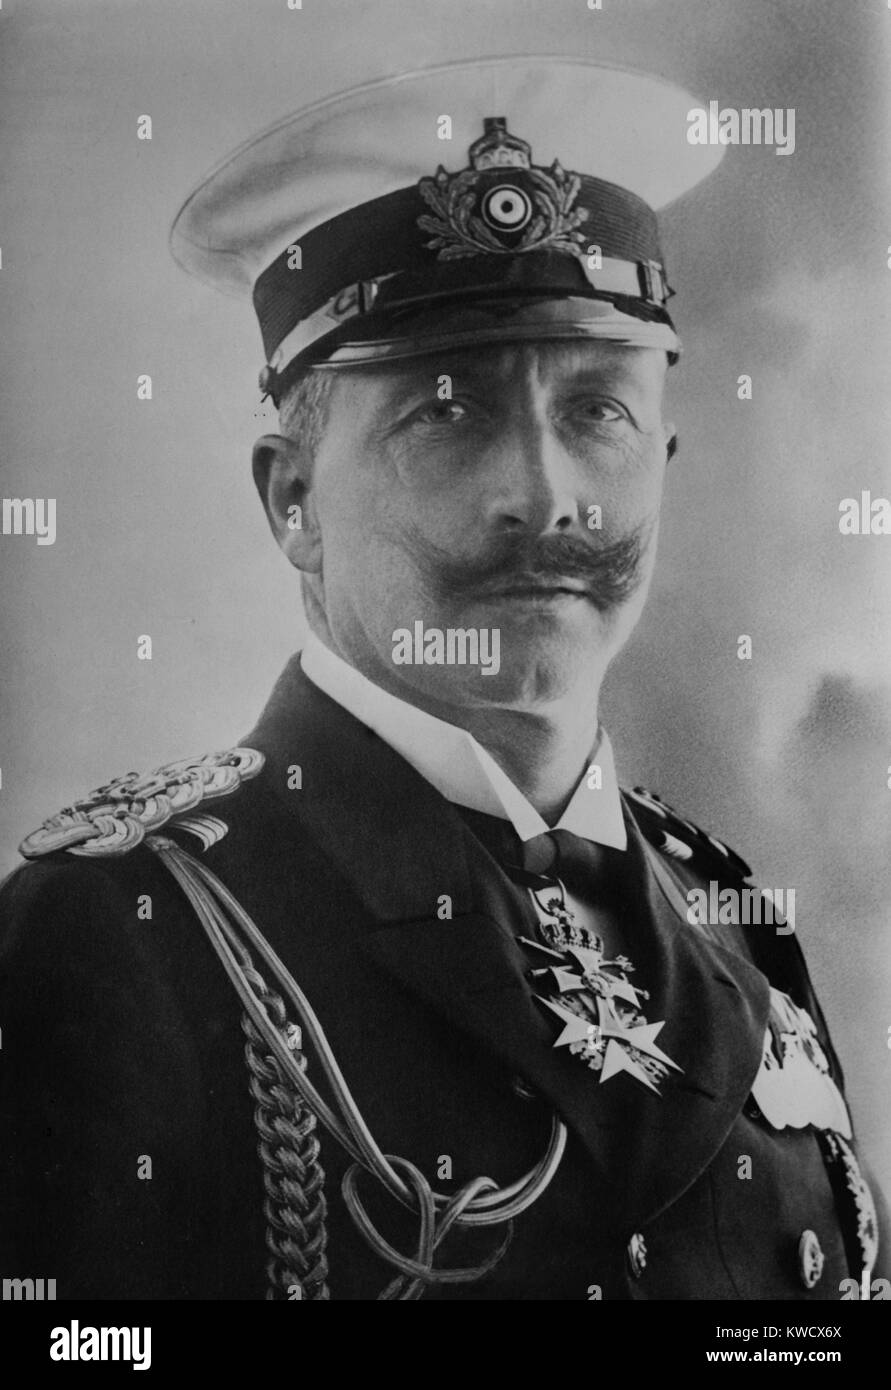 Kaiser Wilhelm II of Germany, c. 1900. His ministers attended to German domestic policy but he dominated international relations with friction, bellicosity, and expansion of the German navy (BSLOC 2017 2 41) Stock Photo